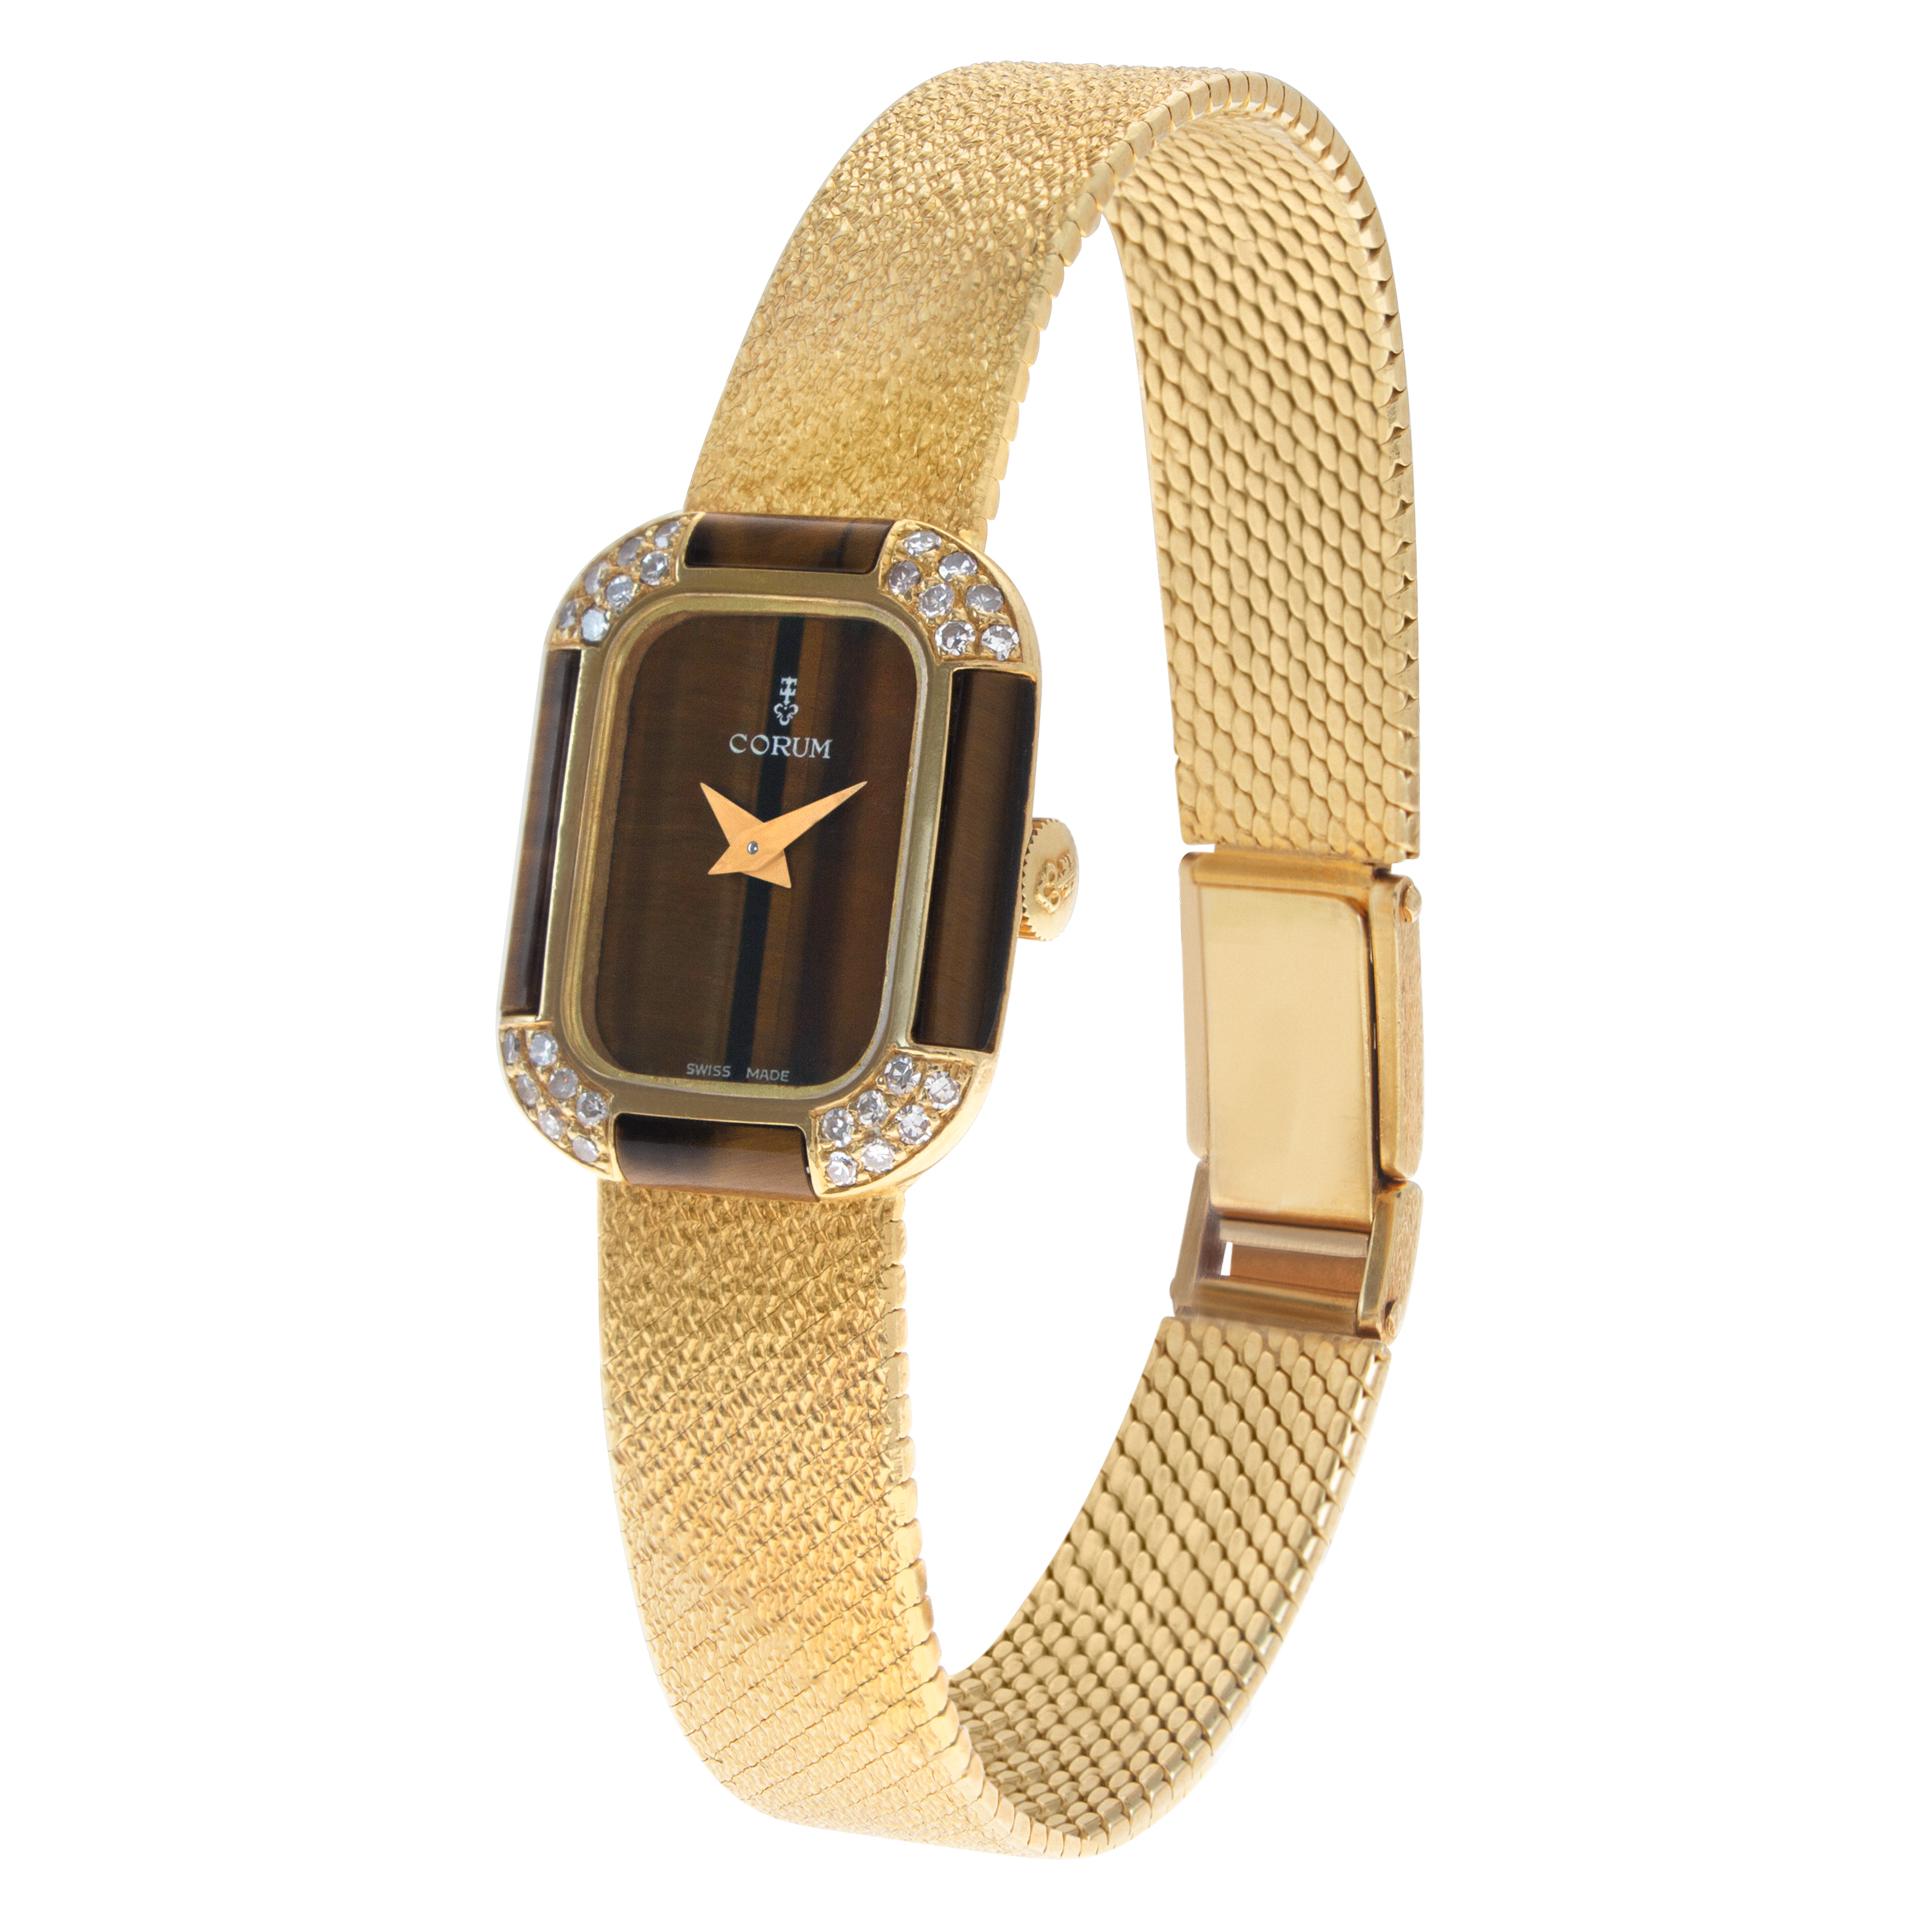 Corum Classic dress watch with tiger eye dial & case with diamond accents on the bezel. Fits 6 inches wrist. Manual wind. 18.5 mm case size. Ref 17142B47. Circa 1990s. Fine Pre-owned Corum Watch. Certified preowned Dress Corum Classic 17142B47 watch